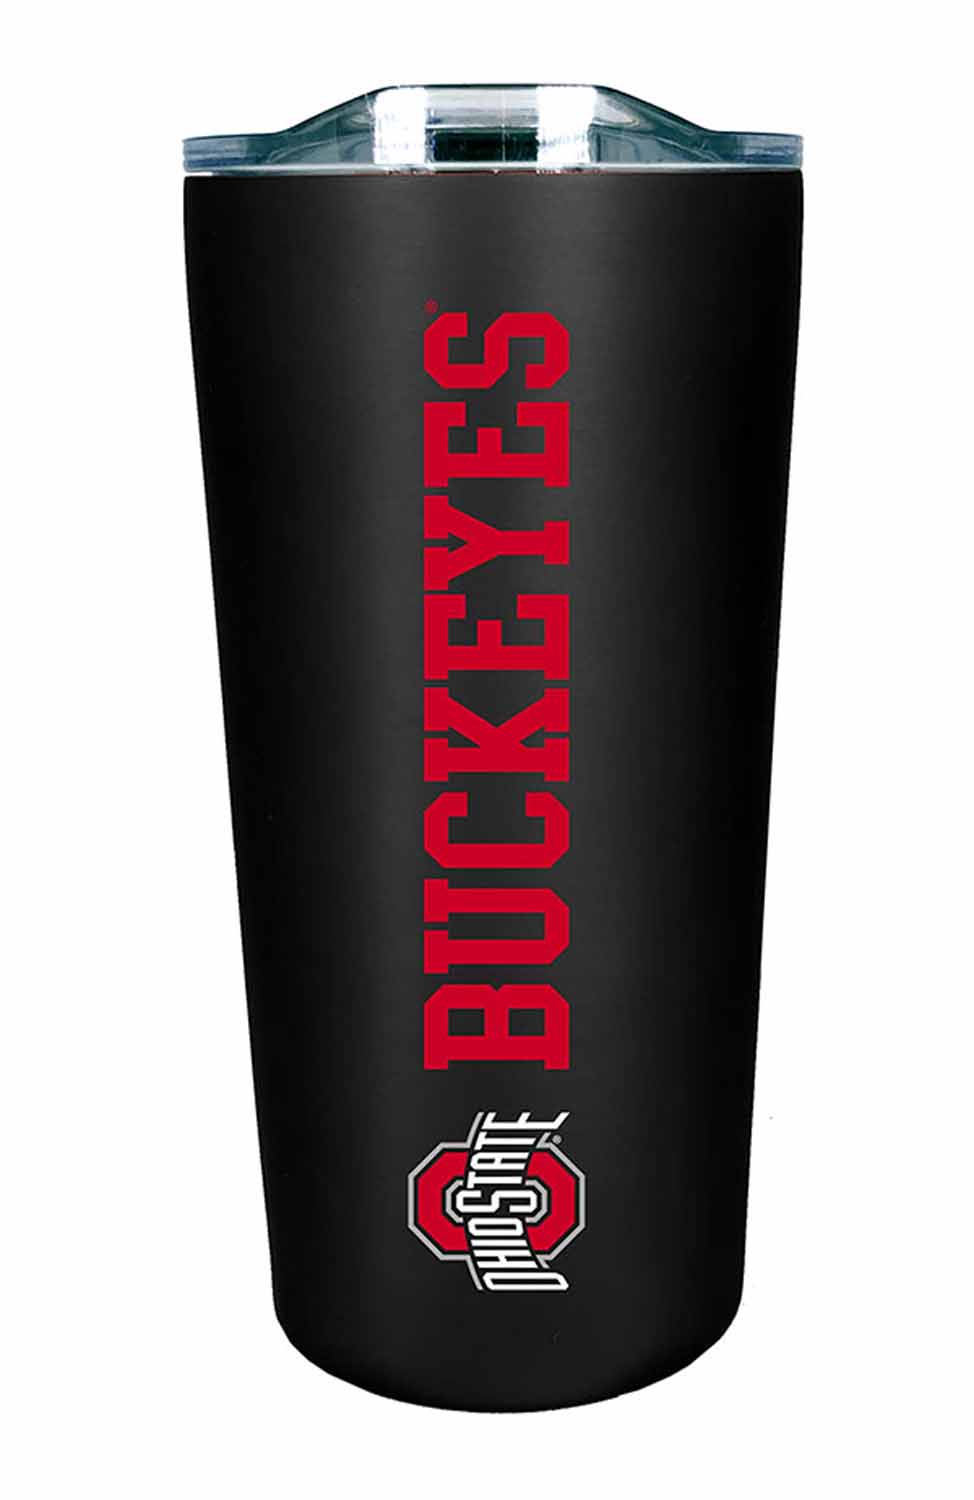 Ohio State Buckeyes NCAA Stainless Steel Tumbler perfect for Gameday - Black